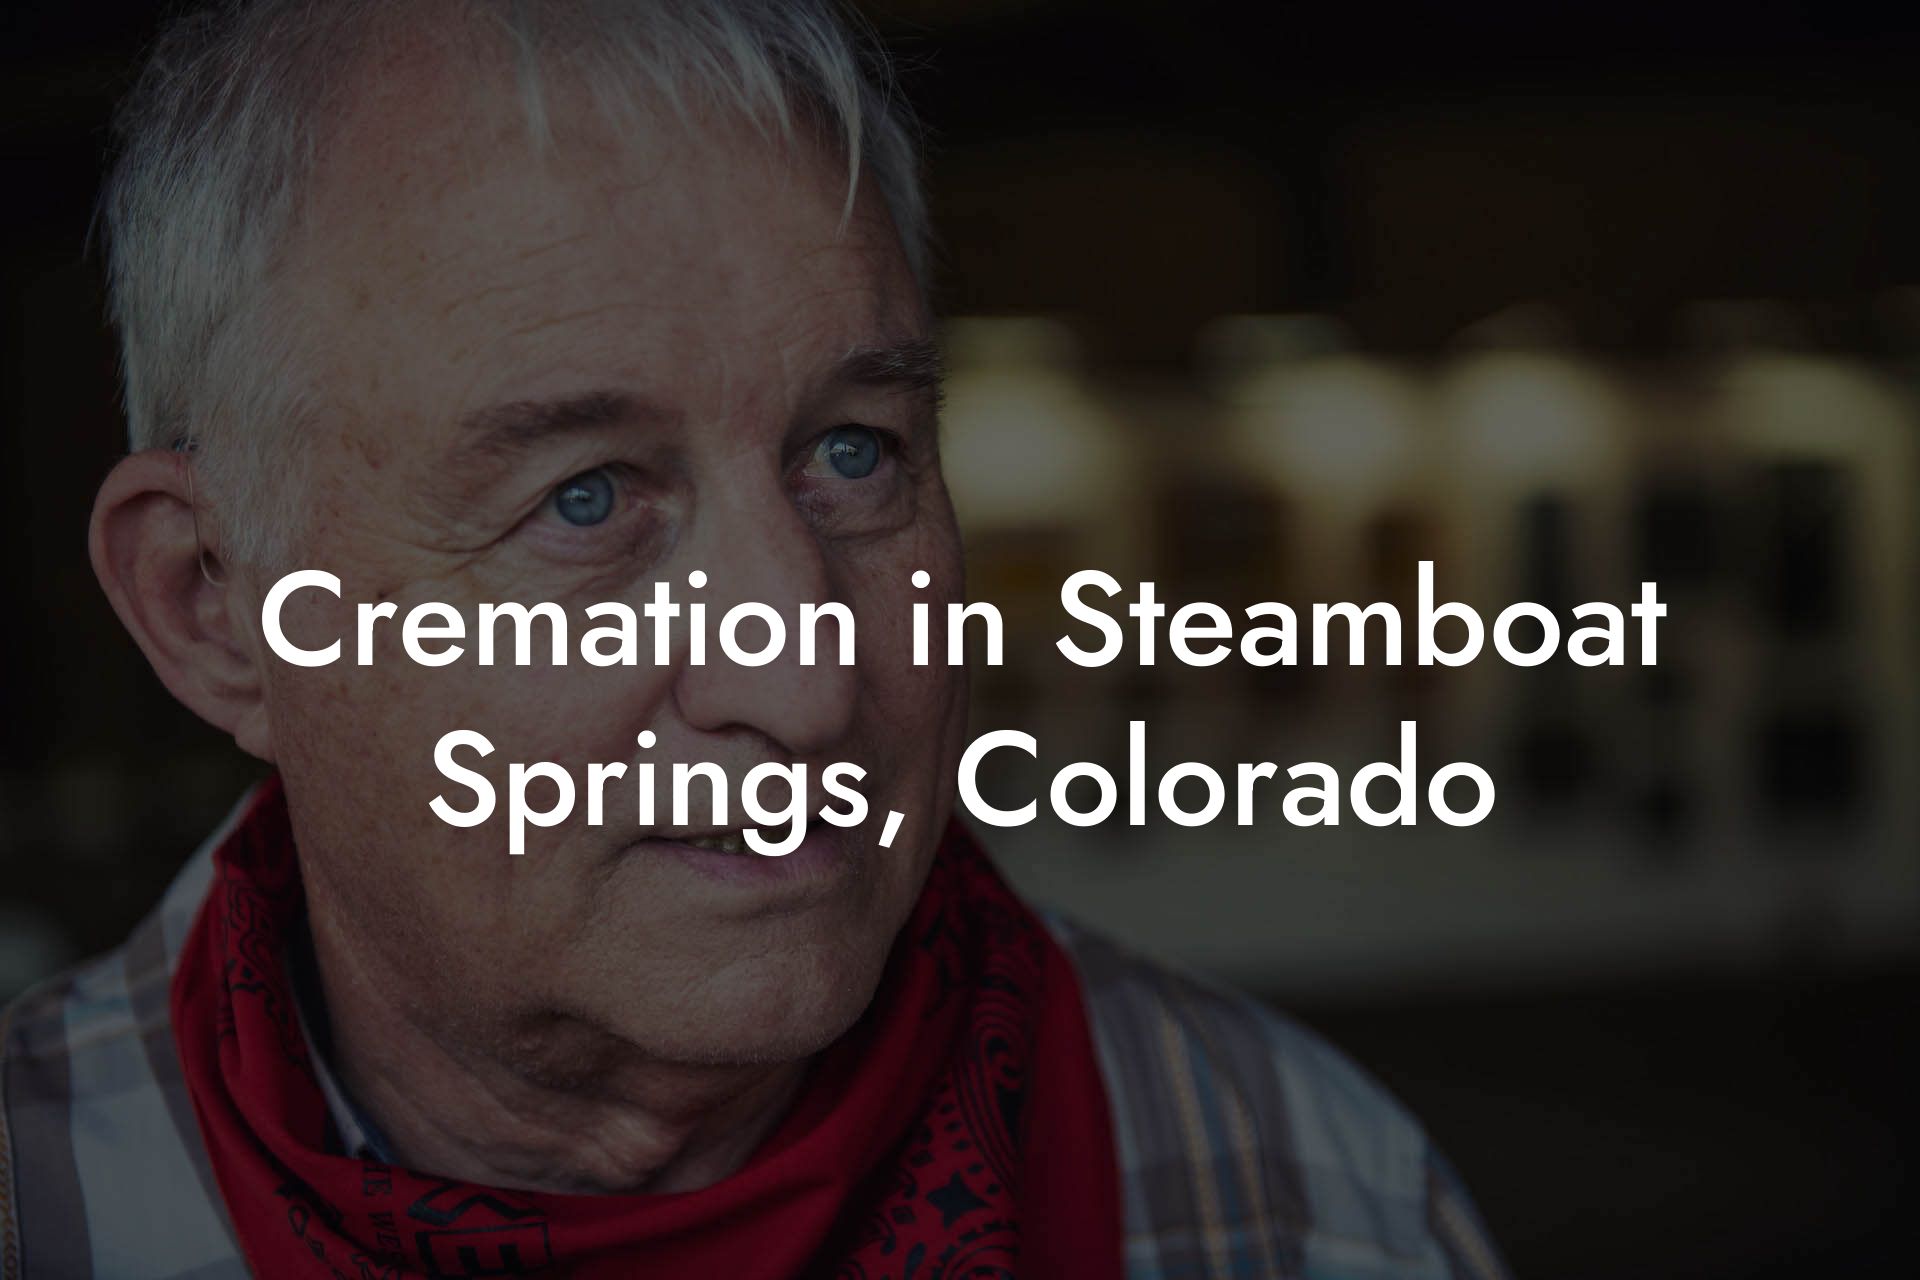 Cremation in Steamboat Springs, Colorado